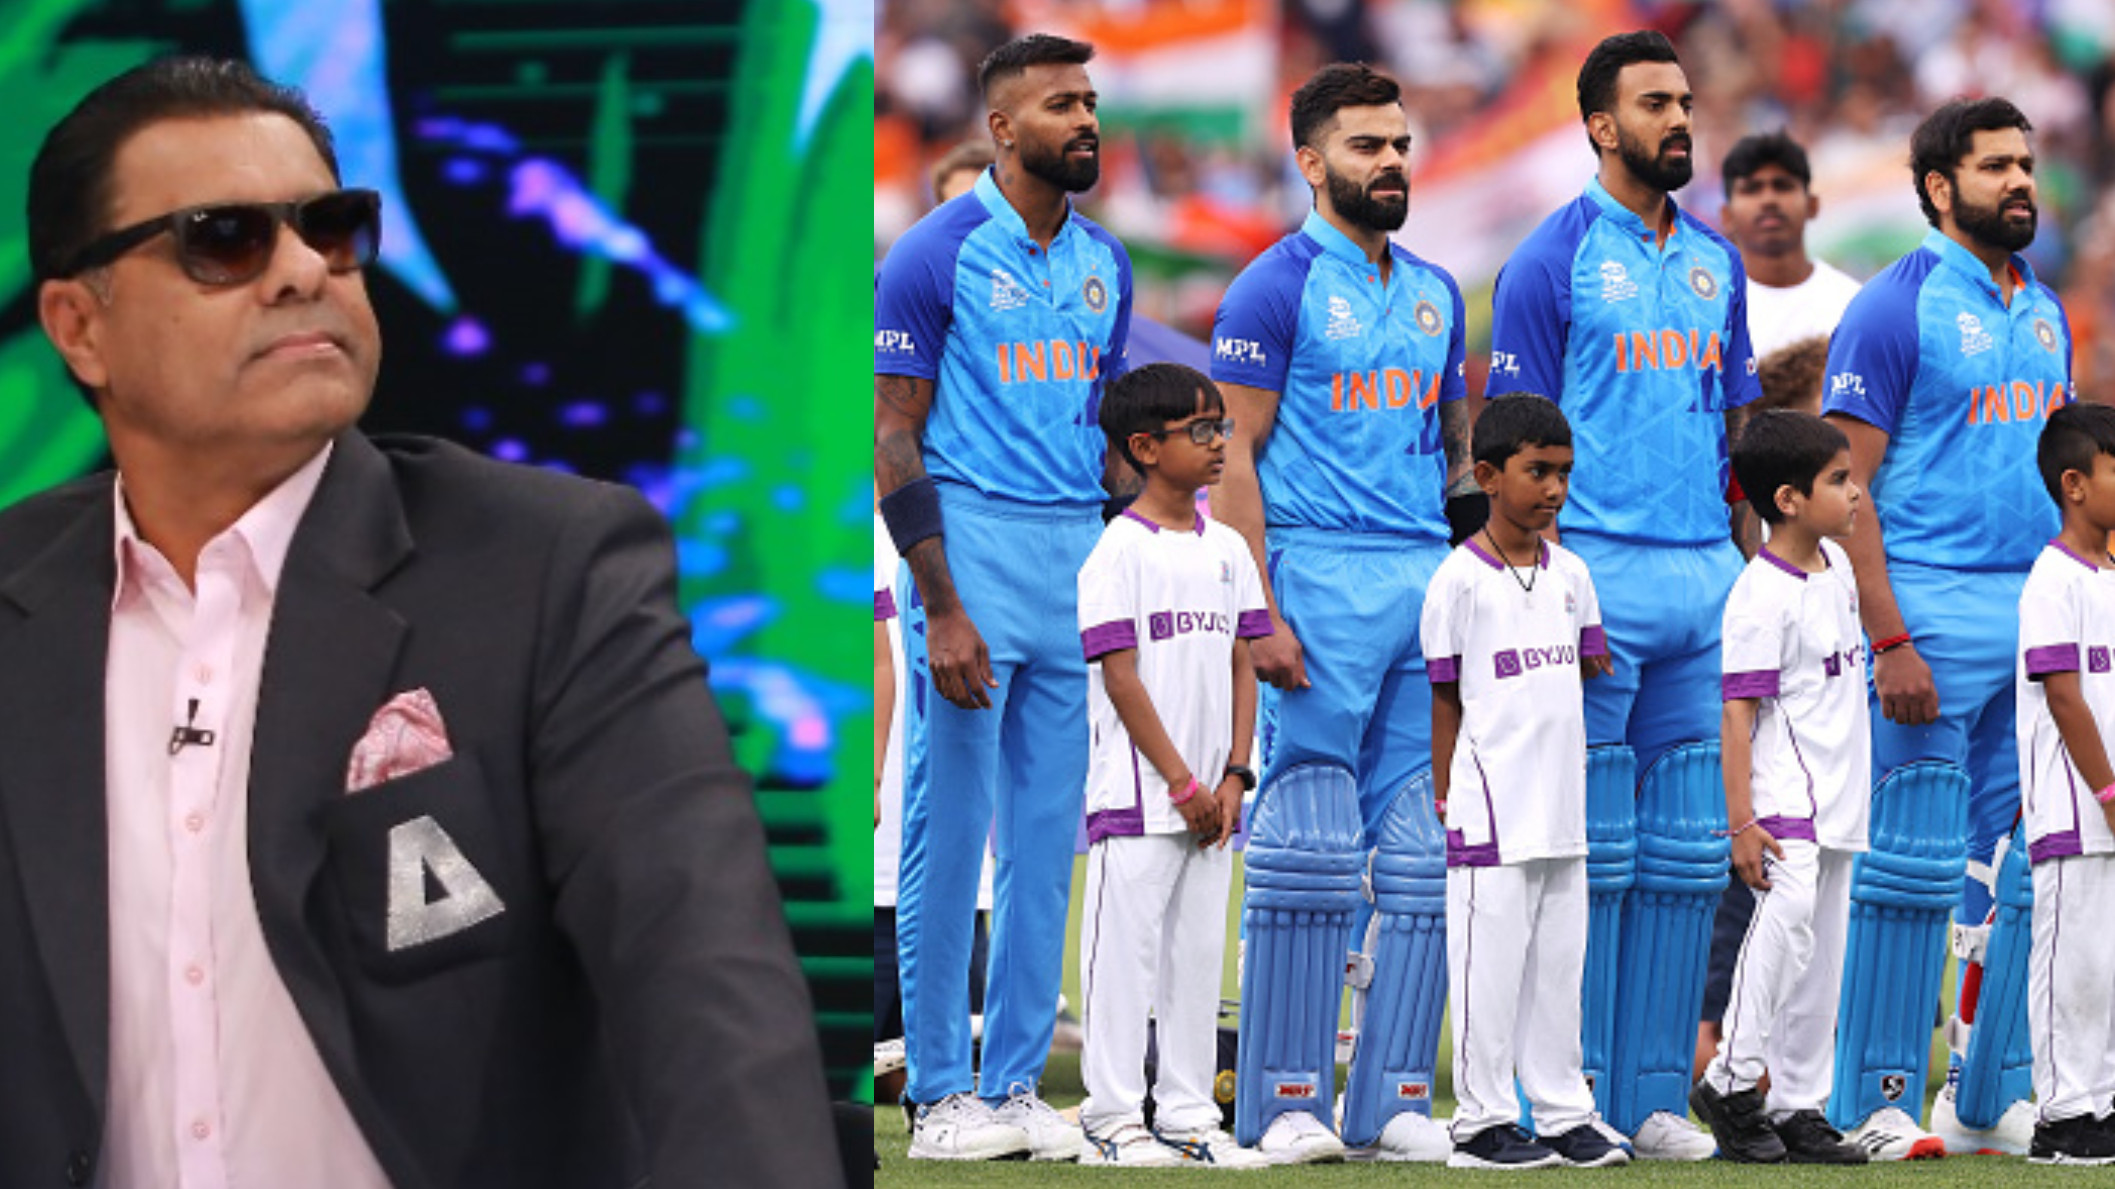 T20 World Cup 2022: “Indian players didn’t play with same courage they do in IPL”- Waqar Younis on India’s exit from T20 WC